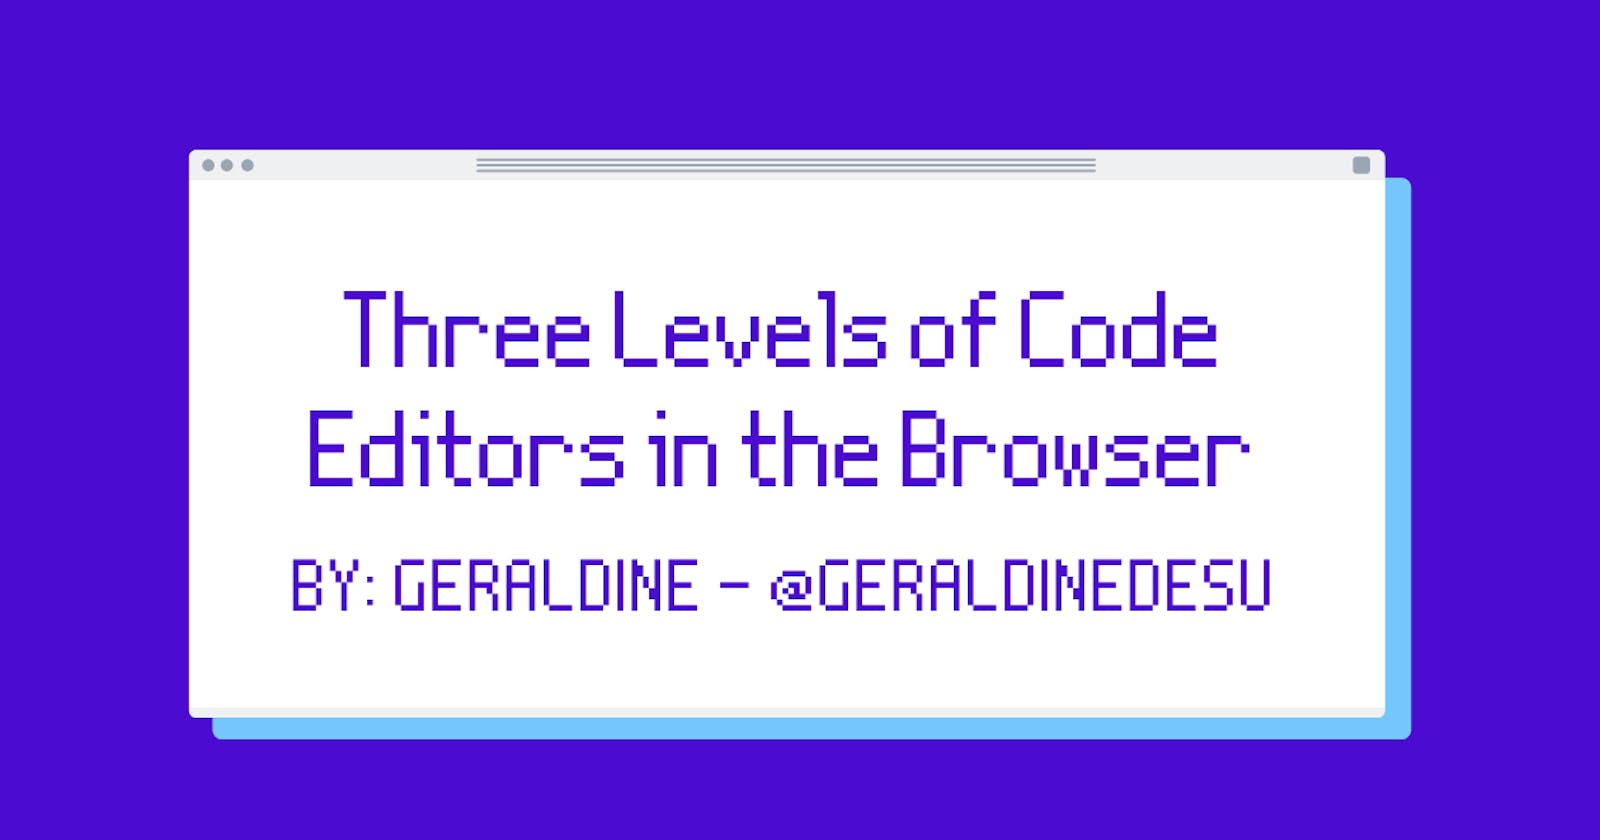 Three Levels of Code Editors in the Browser